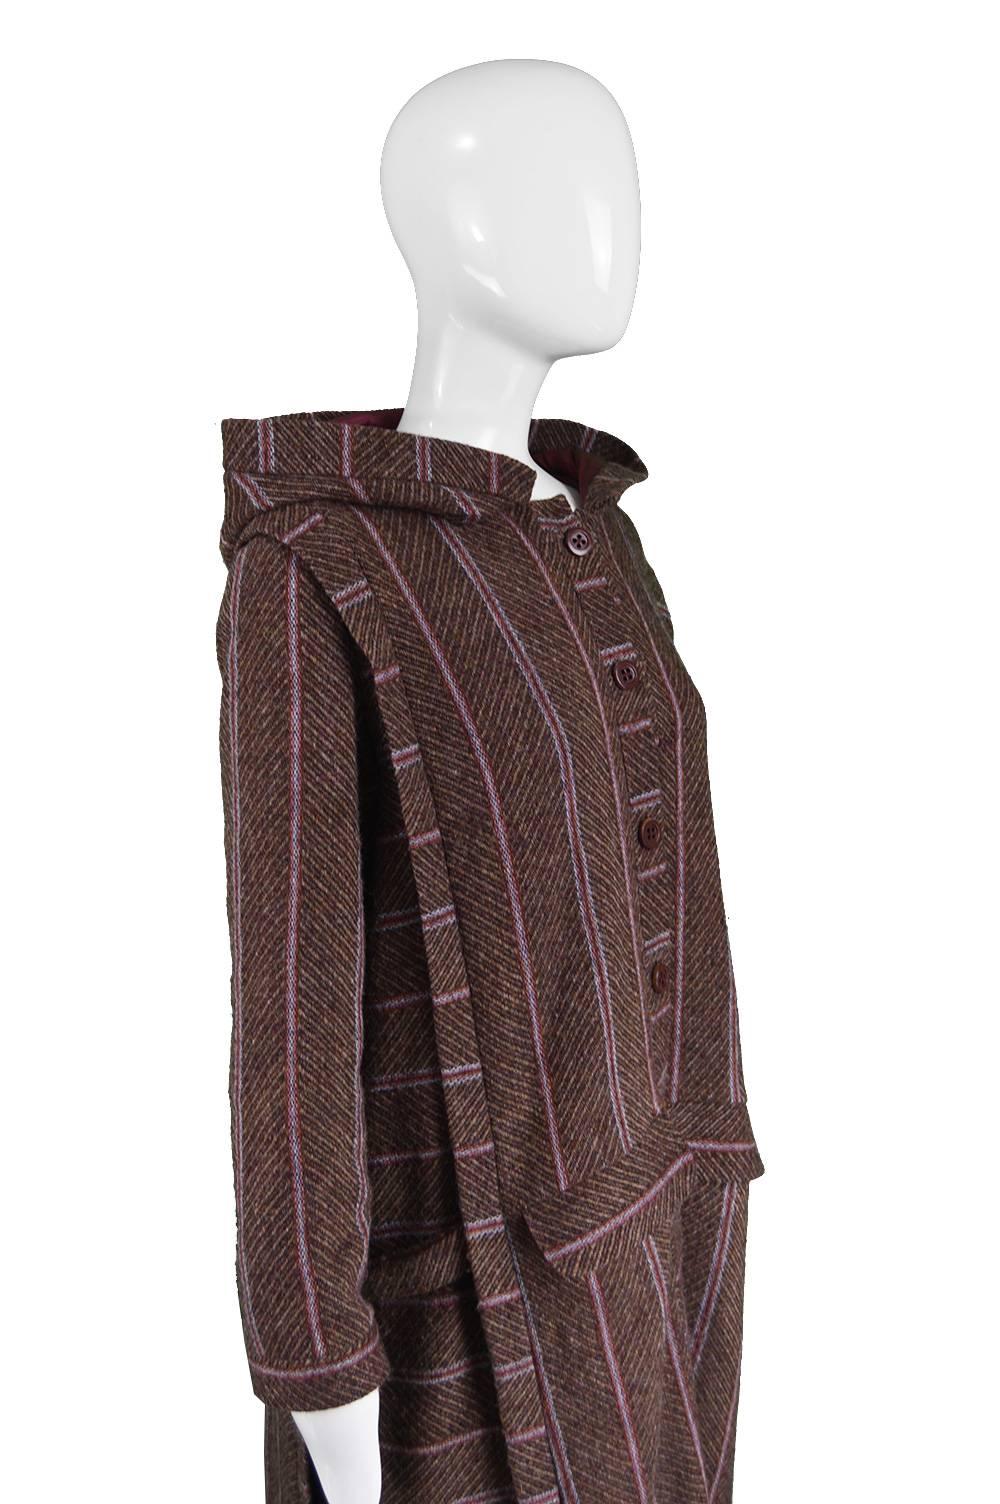 Bill Gibb Dramatic Brown Wool Striped Vintage Coat with Oversized Hood, 1970s For Sale 1